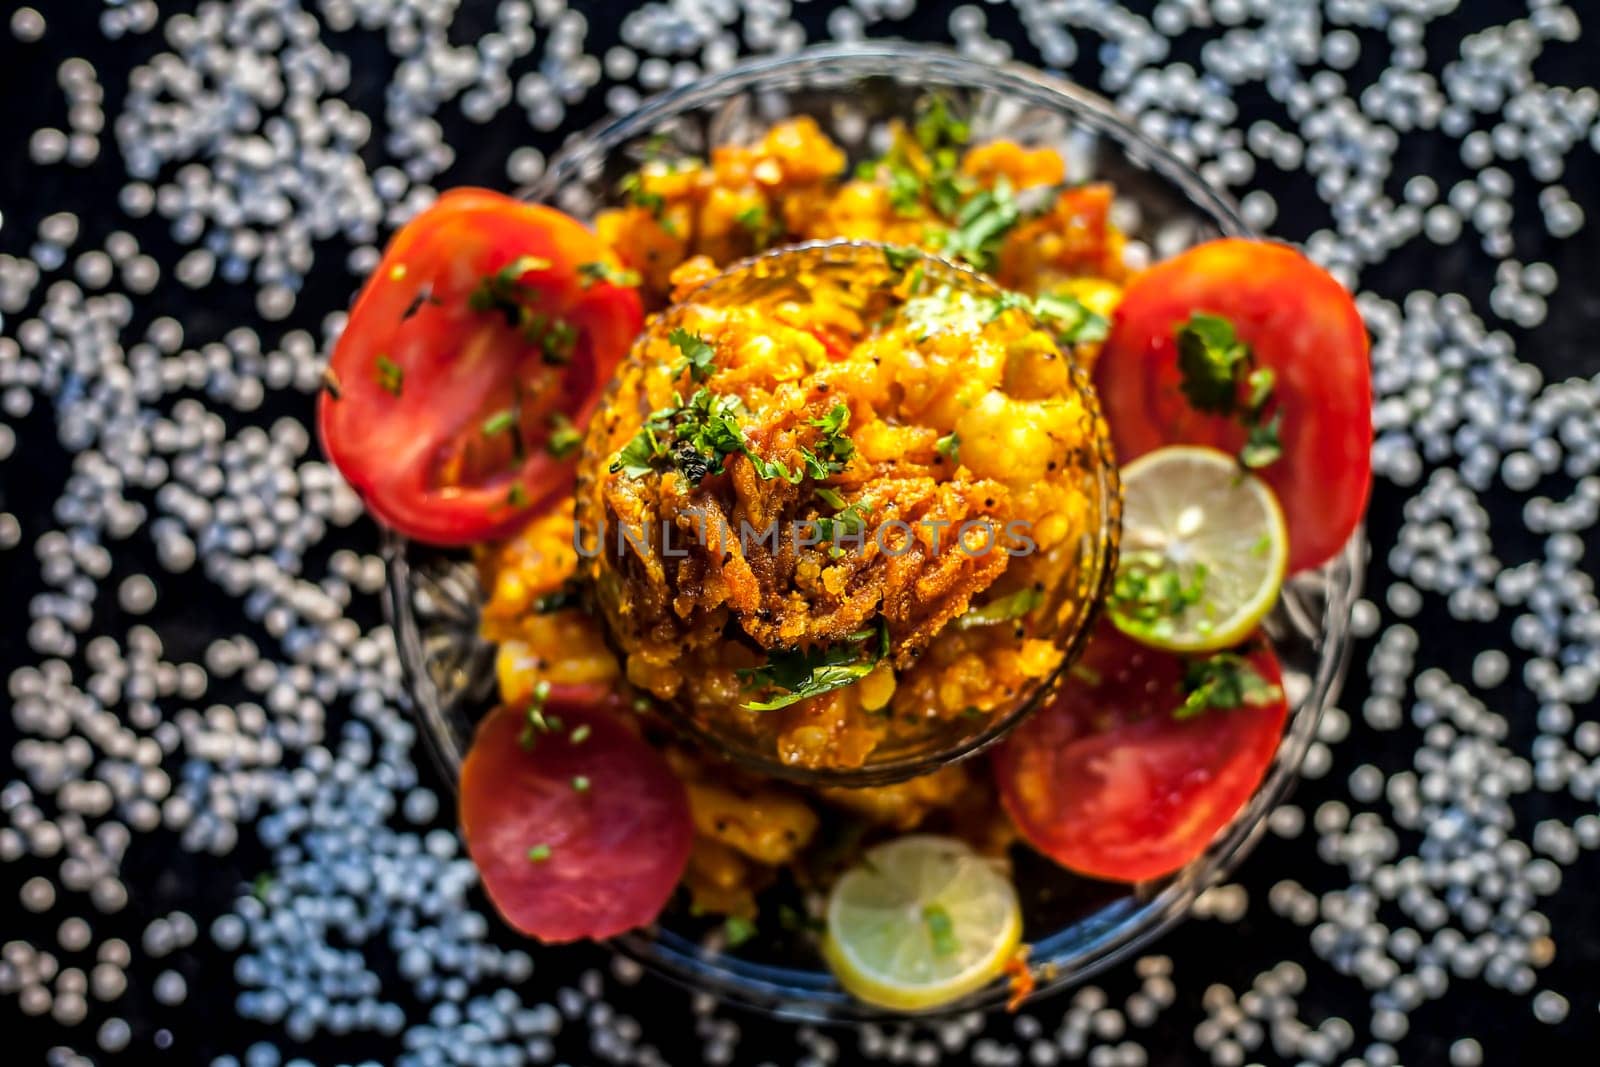 Close-up shot of spicy tasty sabudana khichdi or sago ball khichdi along with some sliced tomatoes, some cut lemons in a glass plate, and raw sago balls. by mirzamlk